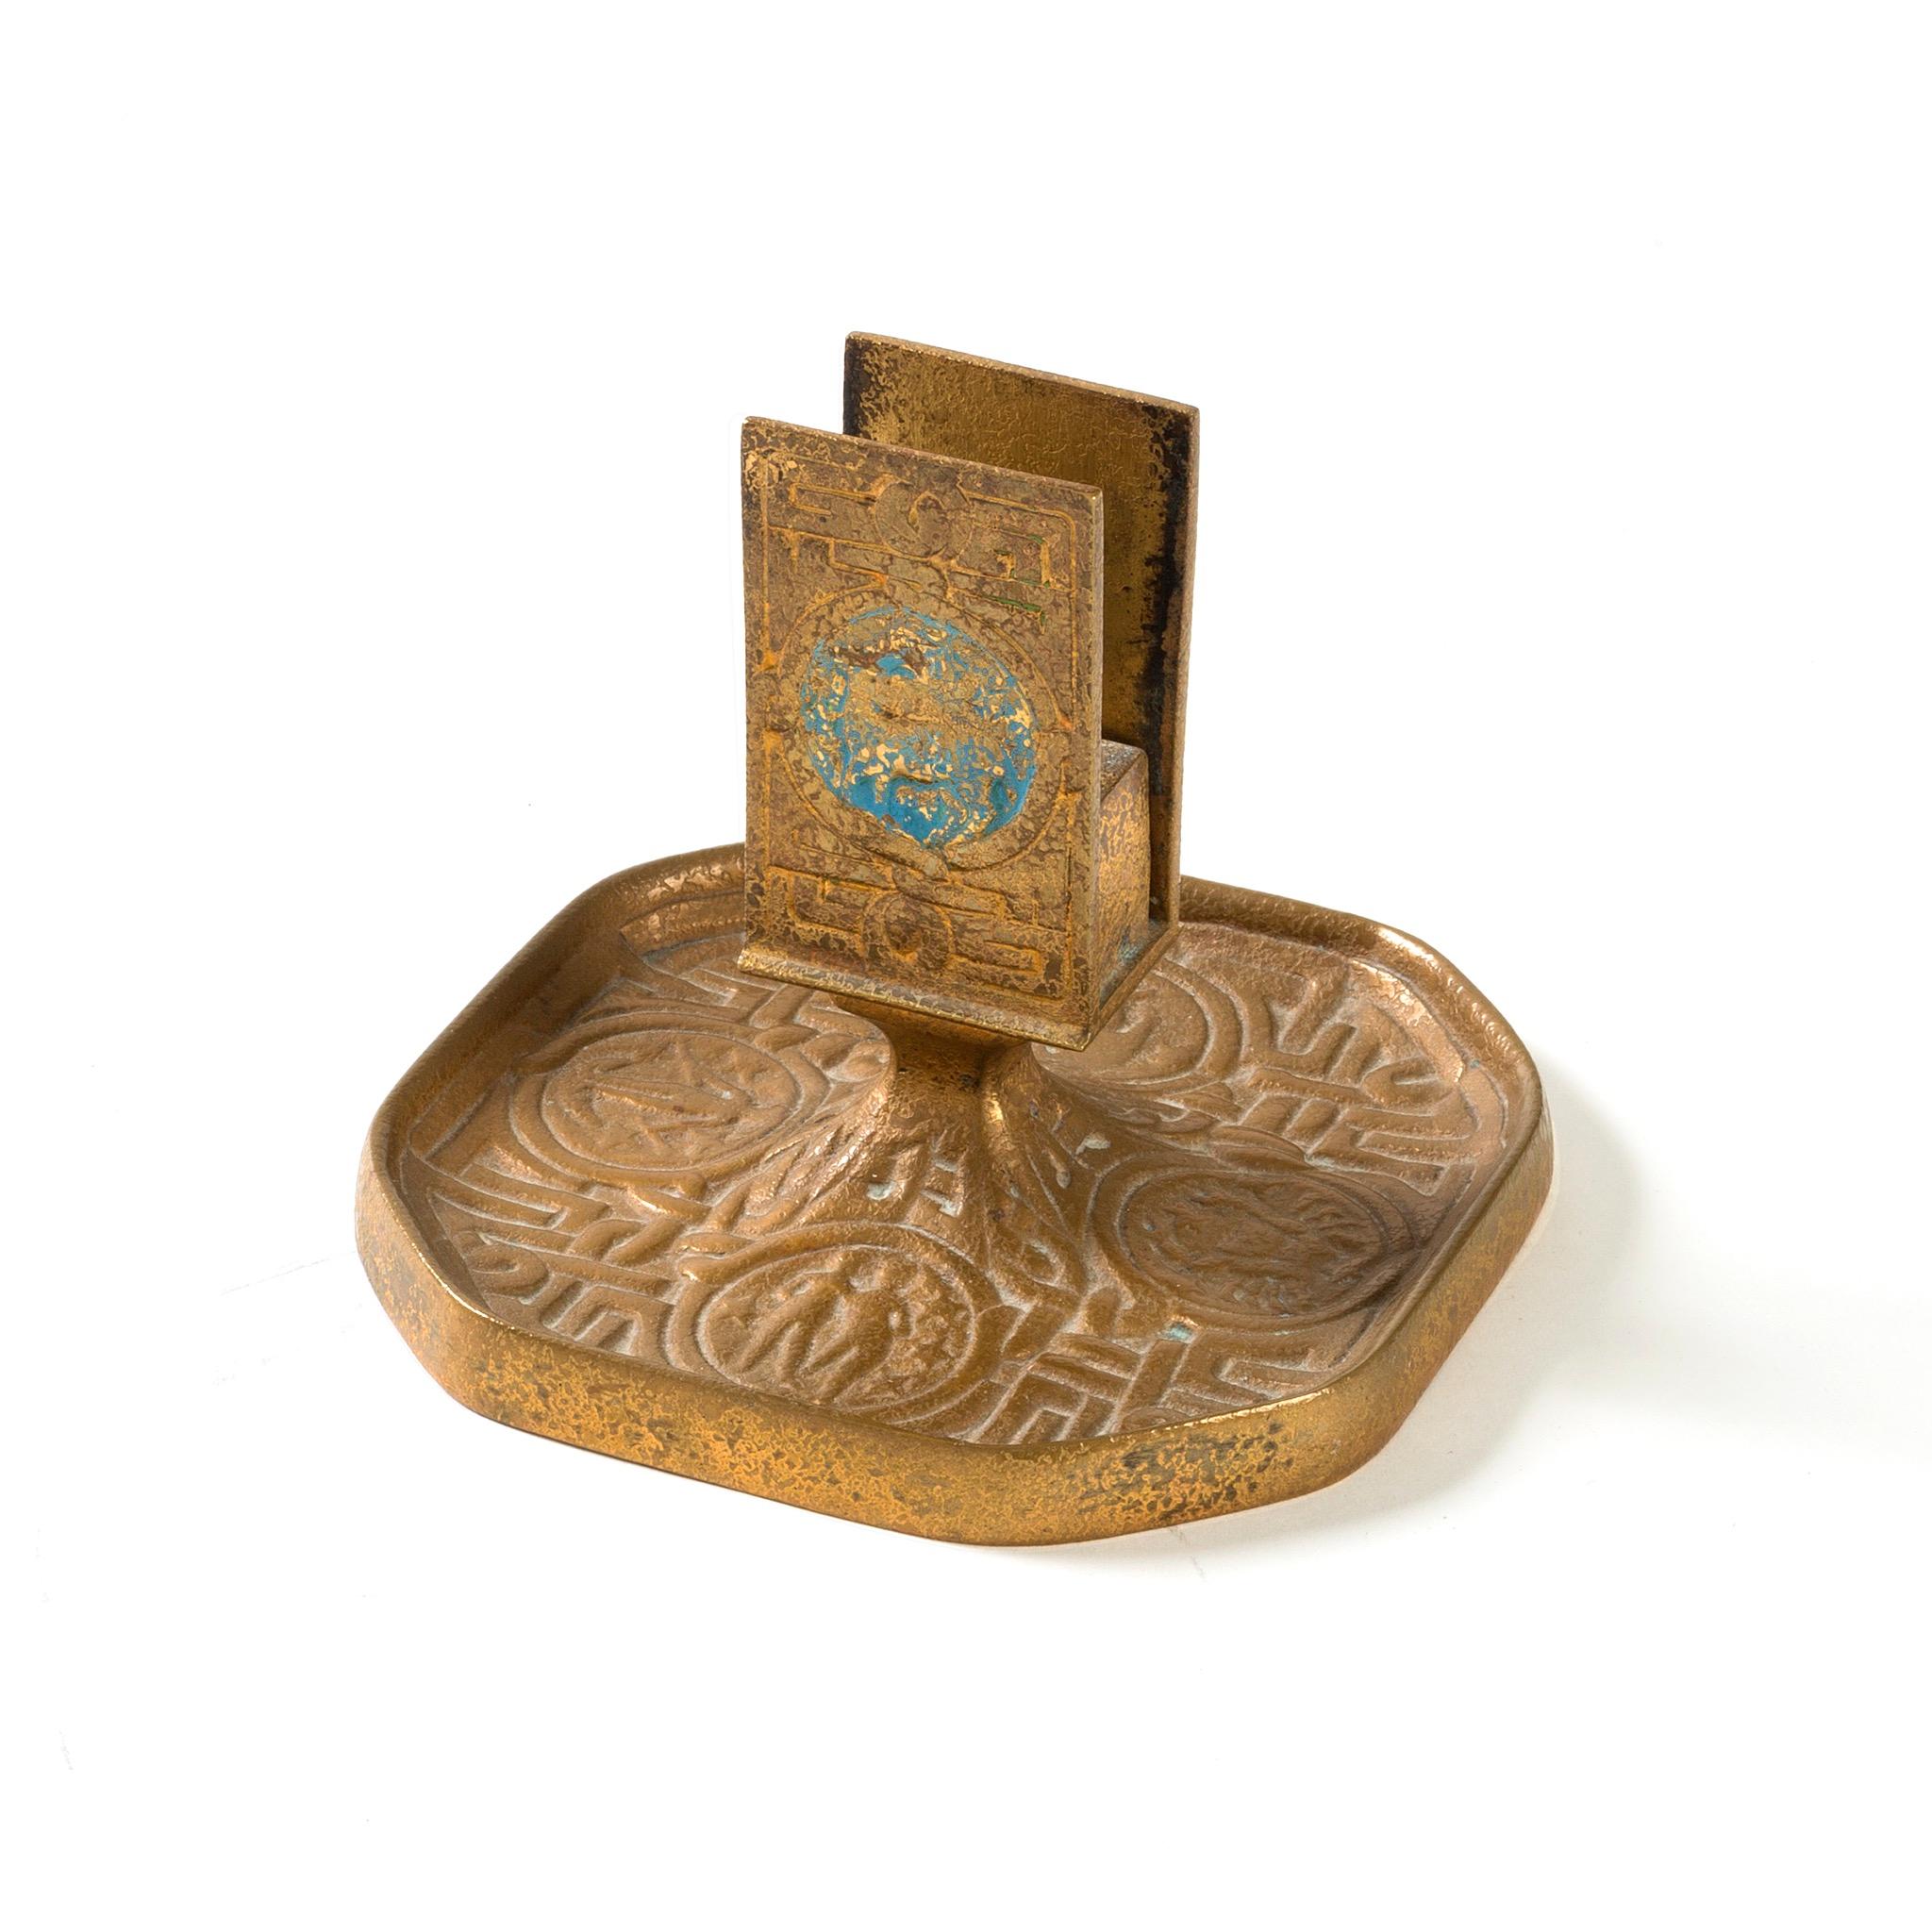 A gilt bronze “Zodiac” match box holder by Tiffany Studios New York. The match box holder features intricate pseudo-Celtic patterning interspersed with circular elements in sky blue, each of which features a stylized depiction of one of the 12 signs